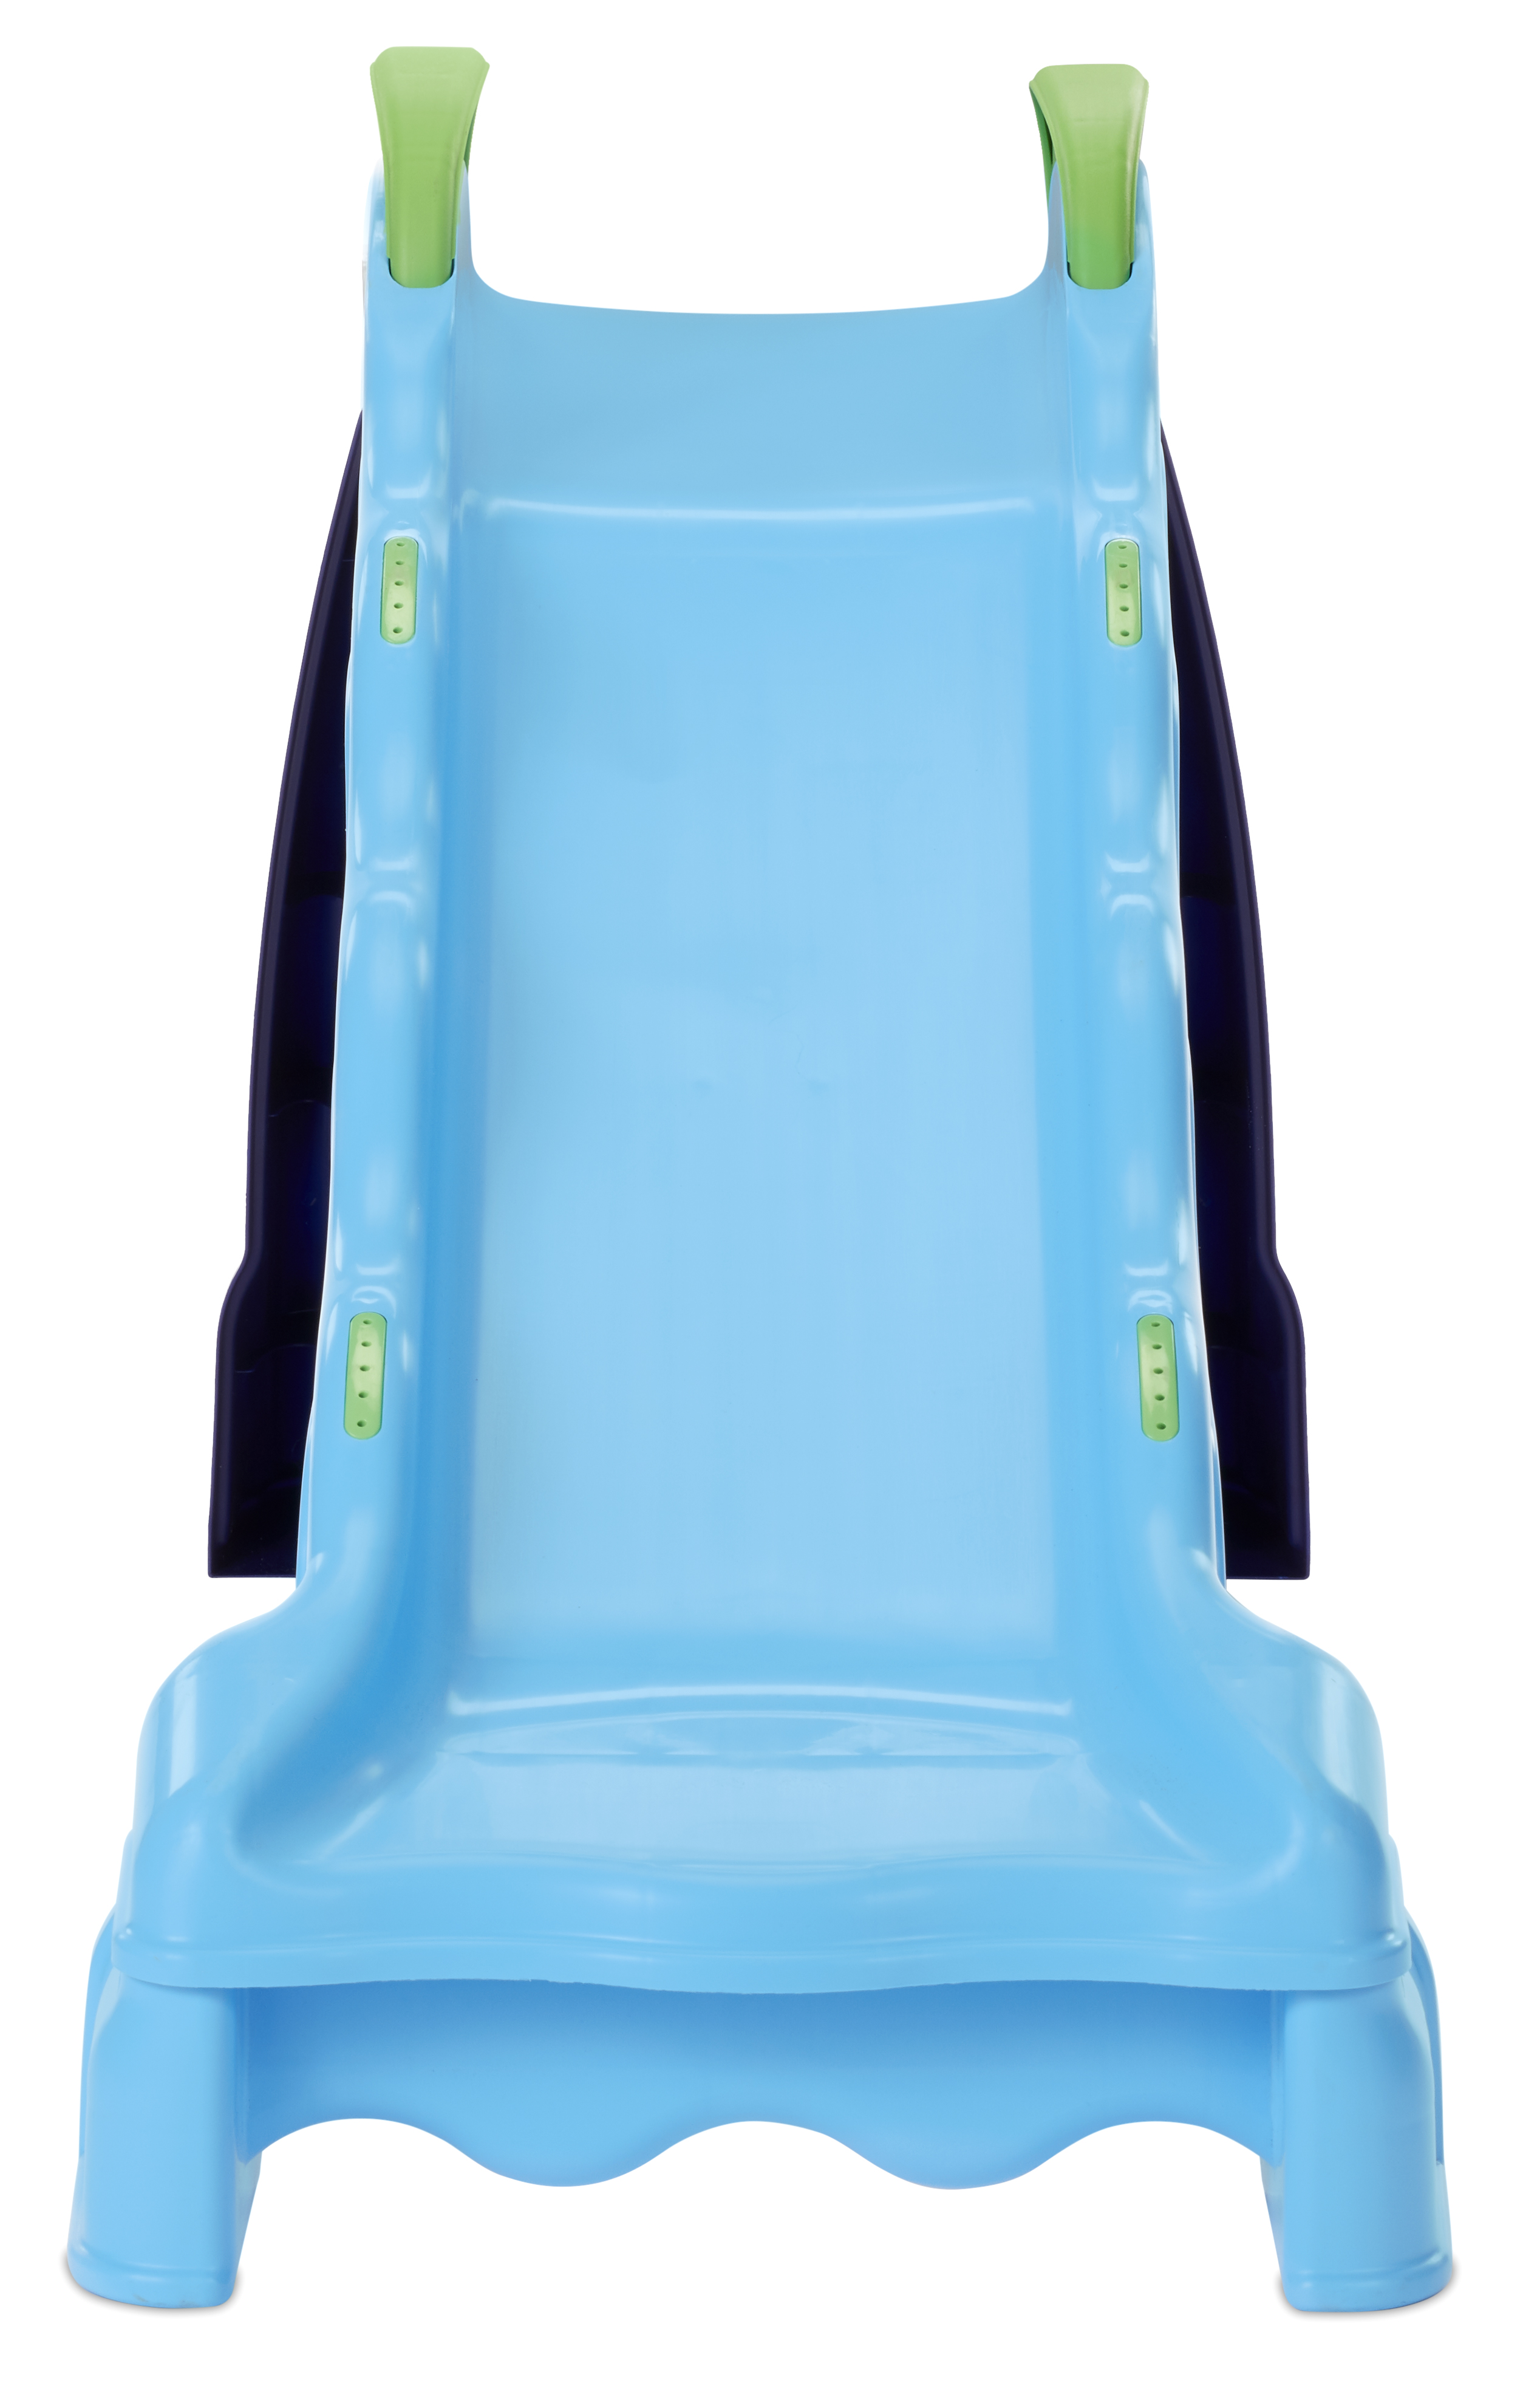 Little Tikes 2-in-1 Outdoor-Indoor Wet or Dry Slide Playground Slide with Folding For Easy Storage, Blue- For Kids Toddlers Boys Girls Ages 2 to 6 Year Old - image 4 of 9